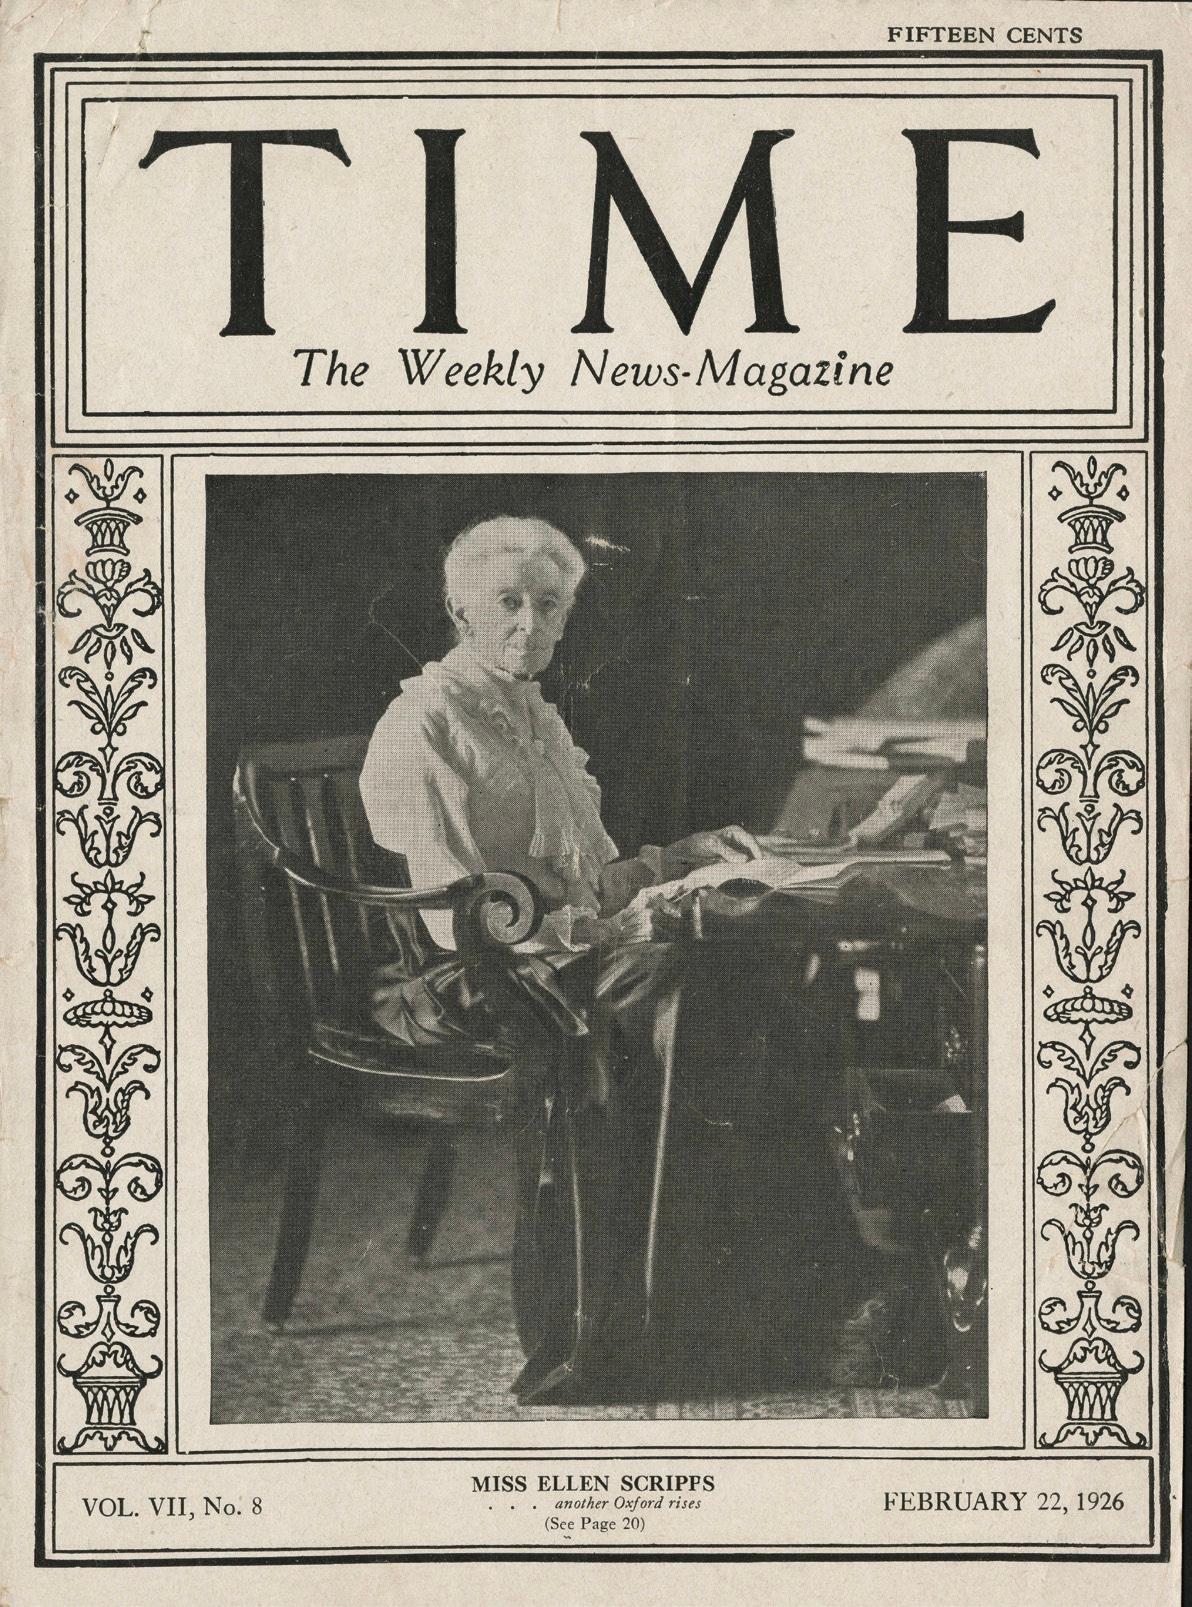 Miss Ellen Scripps on the cover of Time: The Weekly News- Magazine, Feb. 22, 1926. U.S. Archive. (Public Domain)